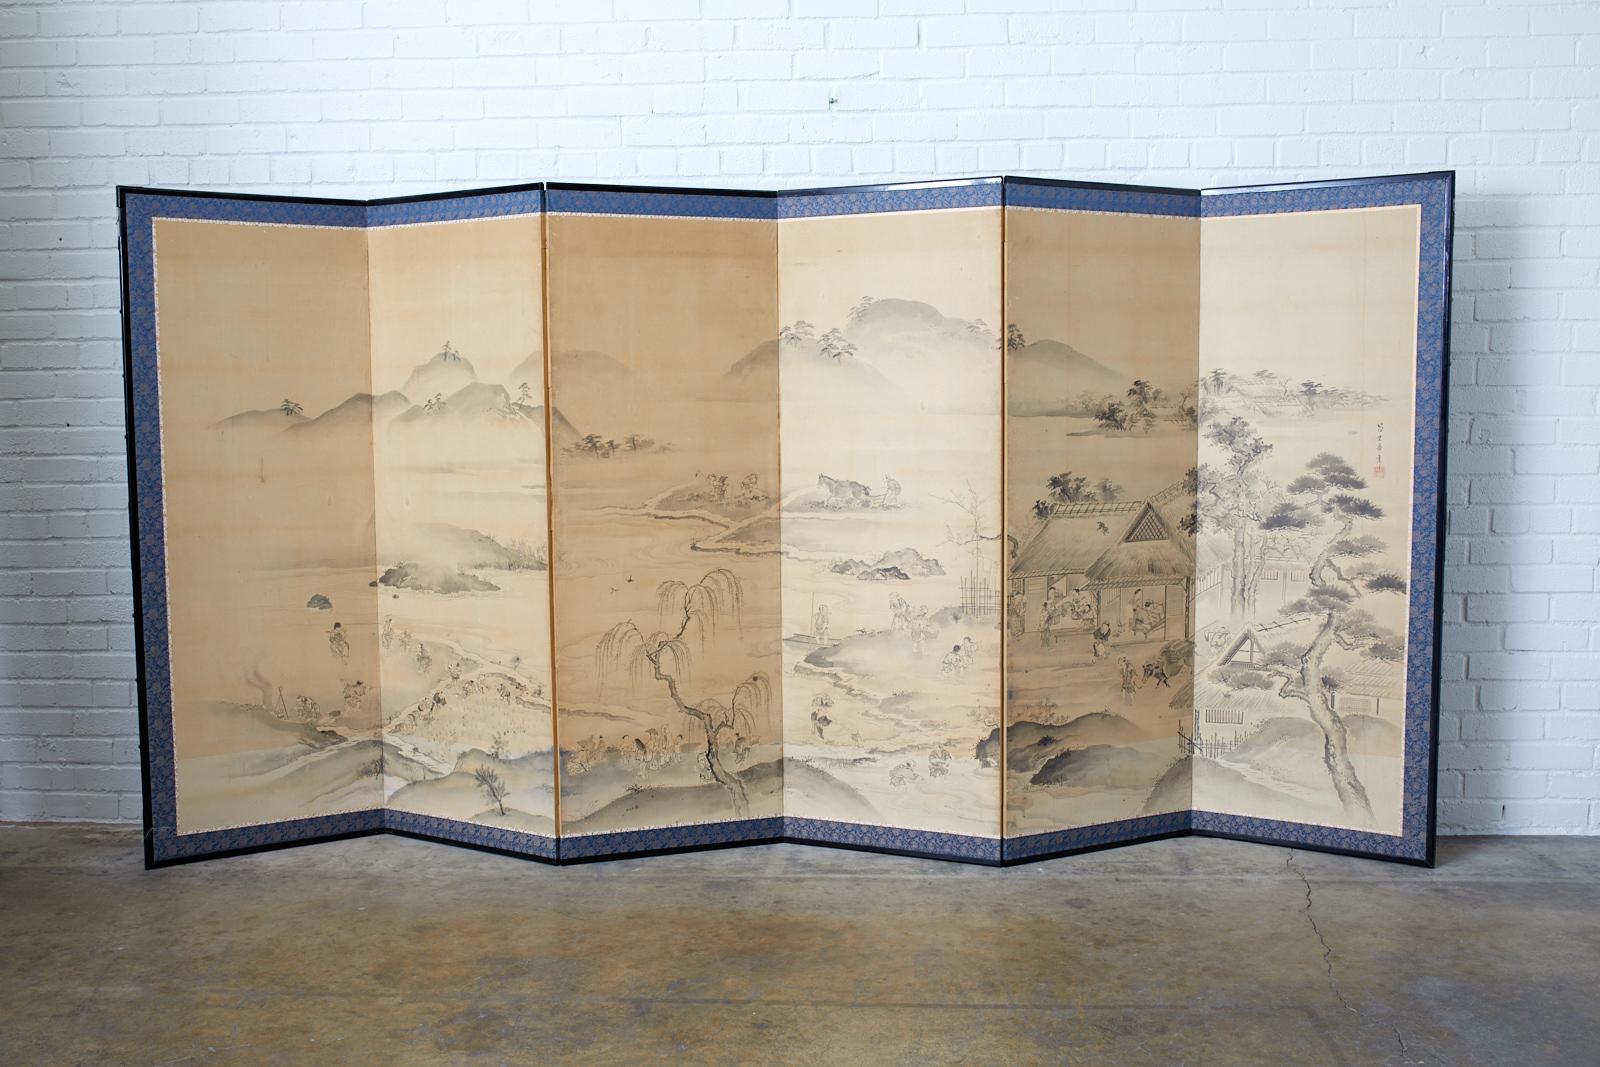 Large 18th century Japanese six panel Edo period screen depicting village farming and agricultural landscape scenes. Ink on paper painting signed from the brush of Fujiwara Morimasa with seal made in the Maruyama-Shijo school style. The screen